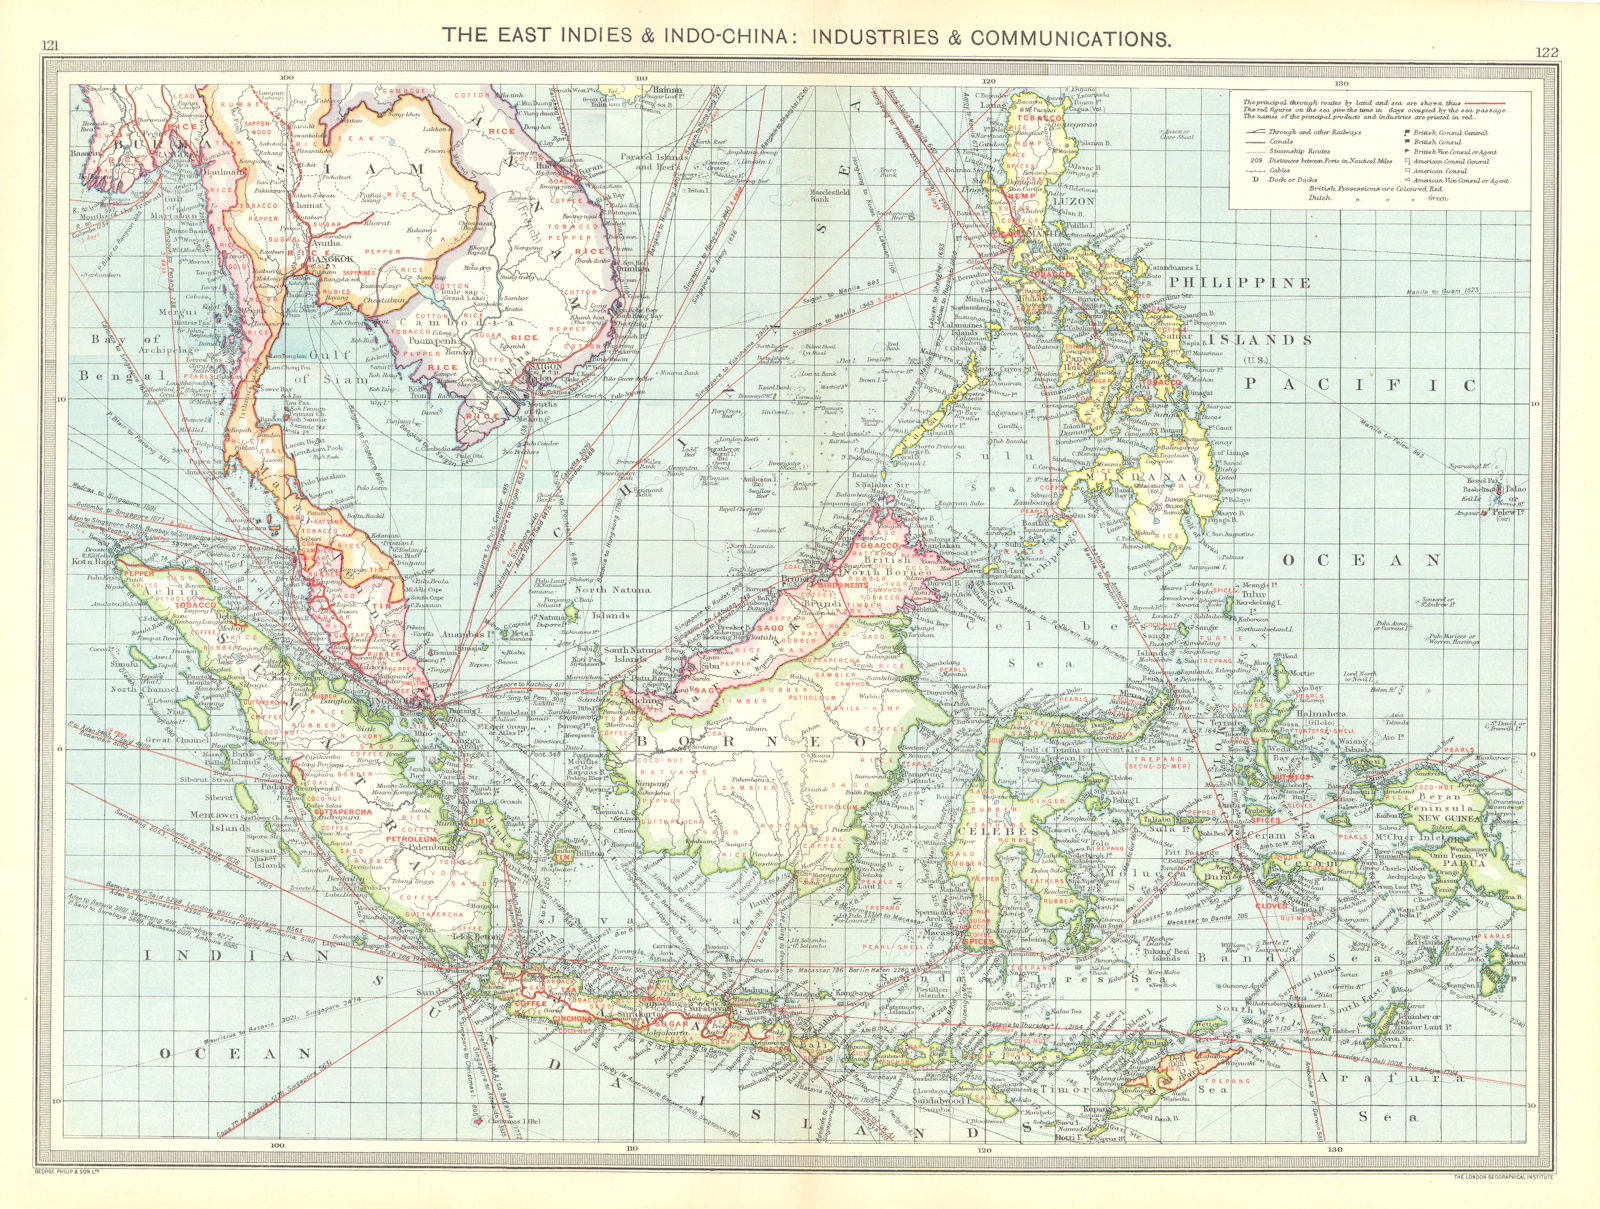 ASIA. East Indies & Indo-China. Industries & Communications 1907 old map